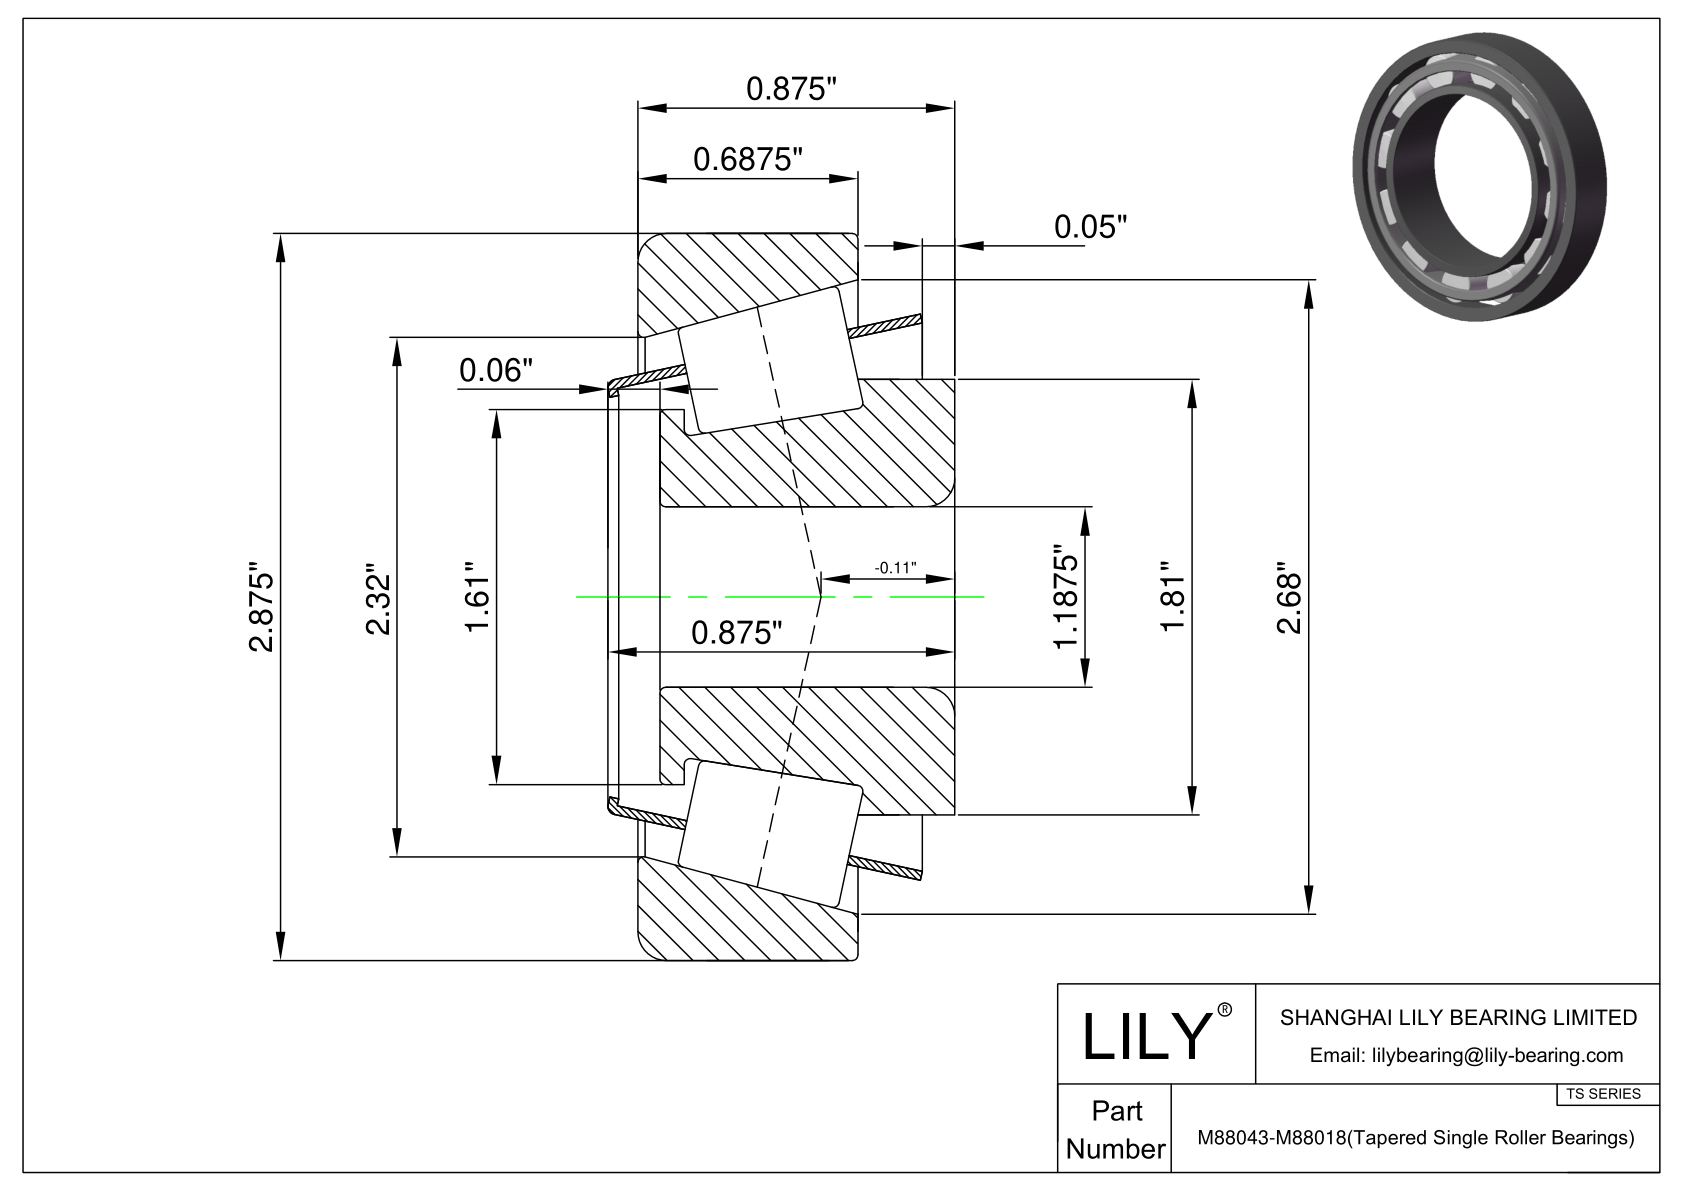 M88043-M88018 TS (Tapered Single Roller Bearings) (Imperial) cad drawing